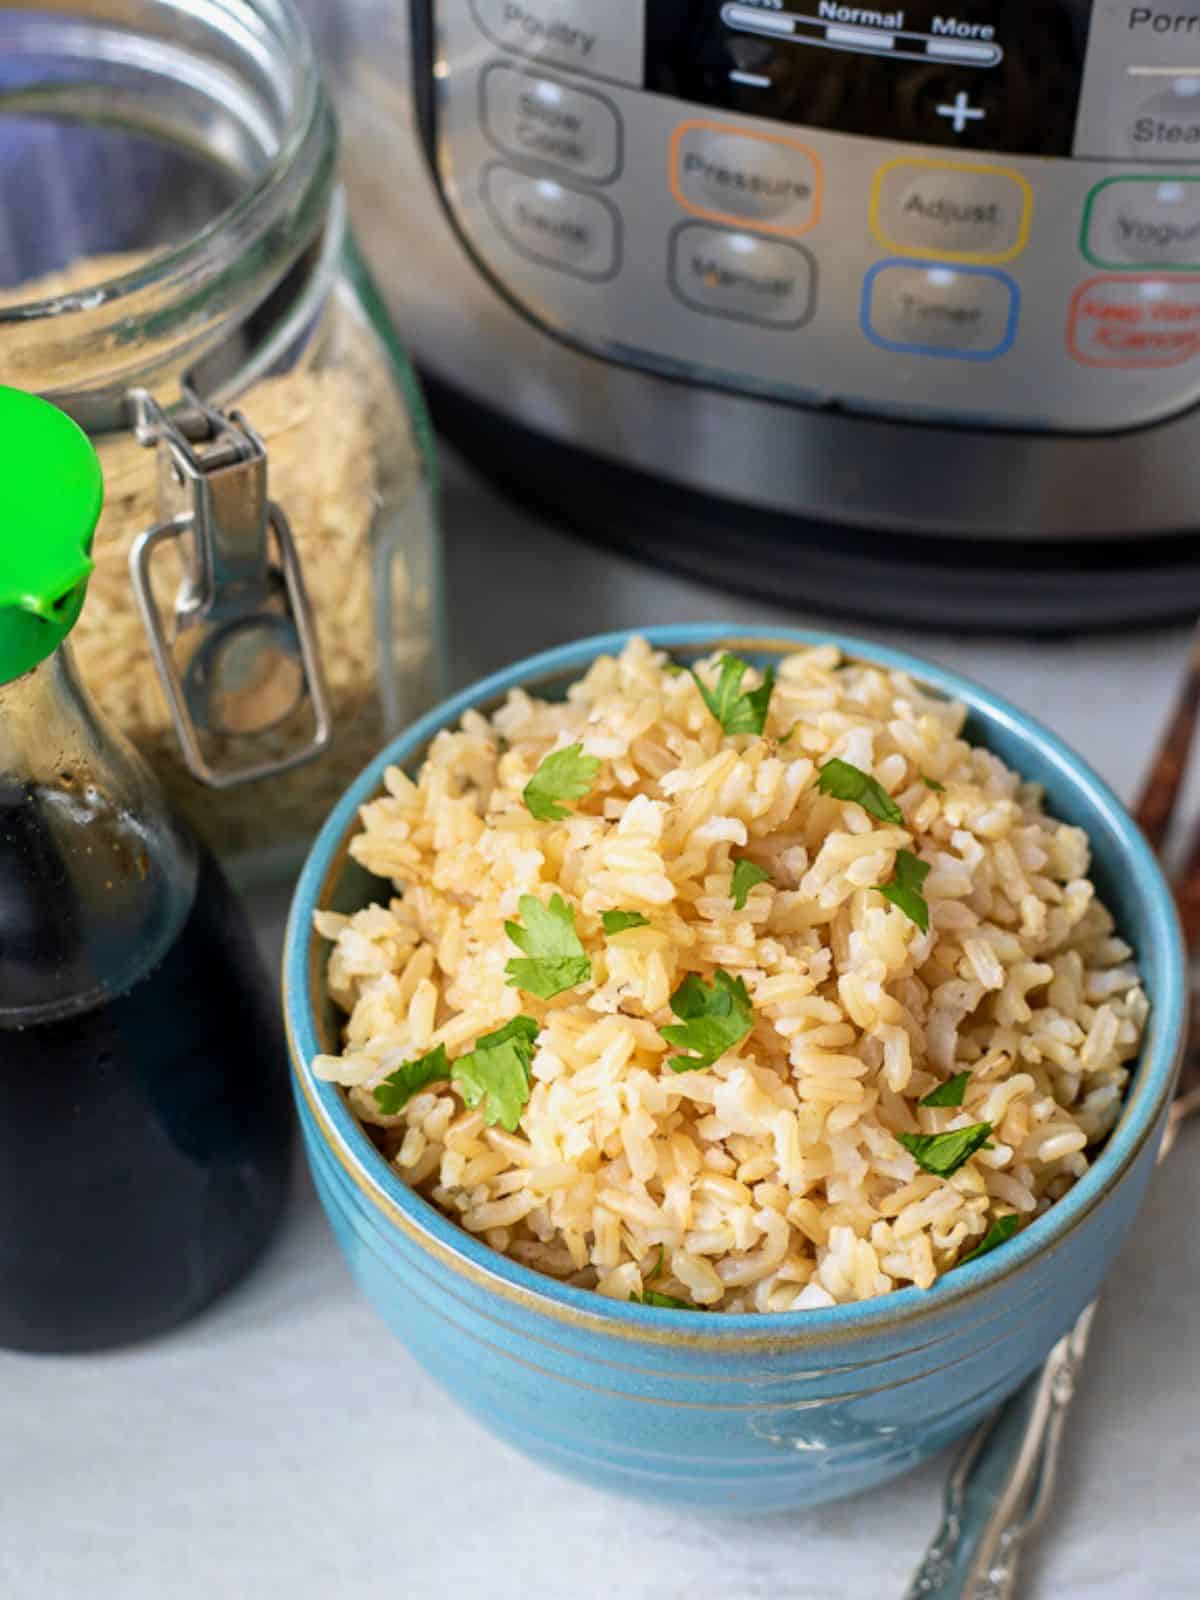 Bowl of brown rice next to Instant Pot.